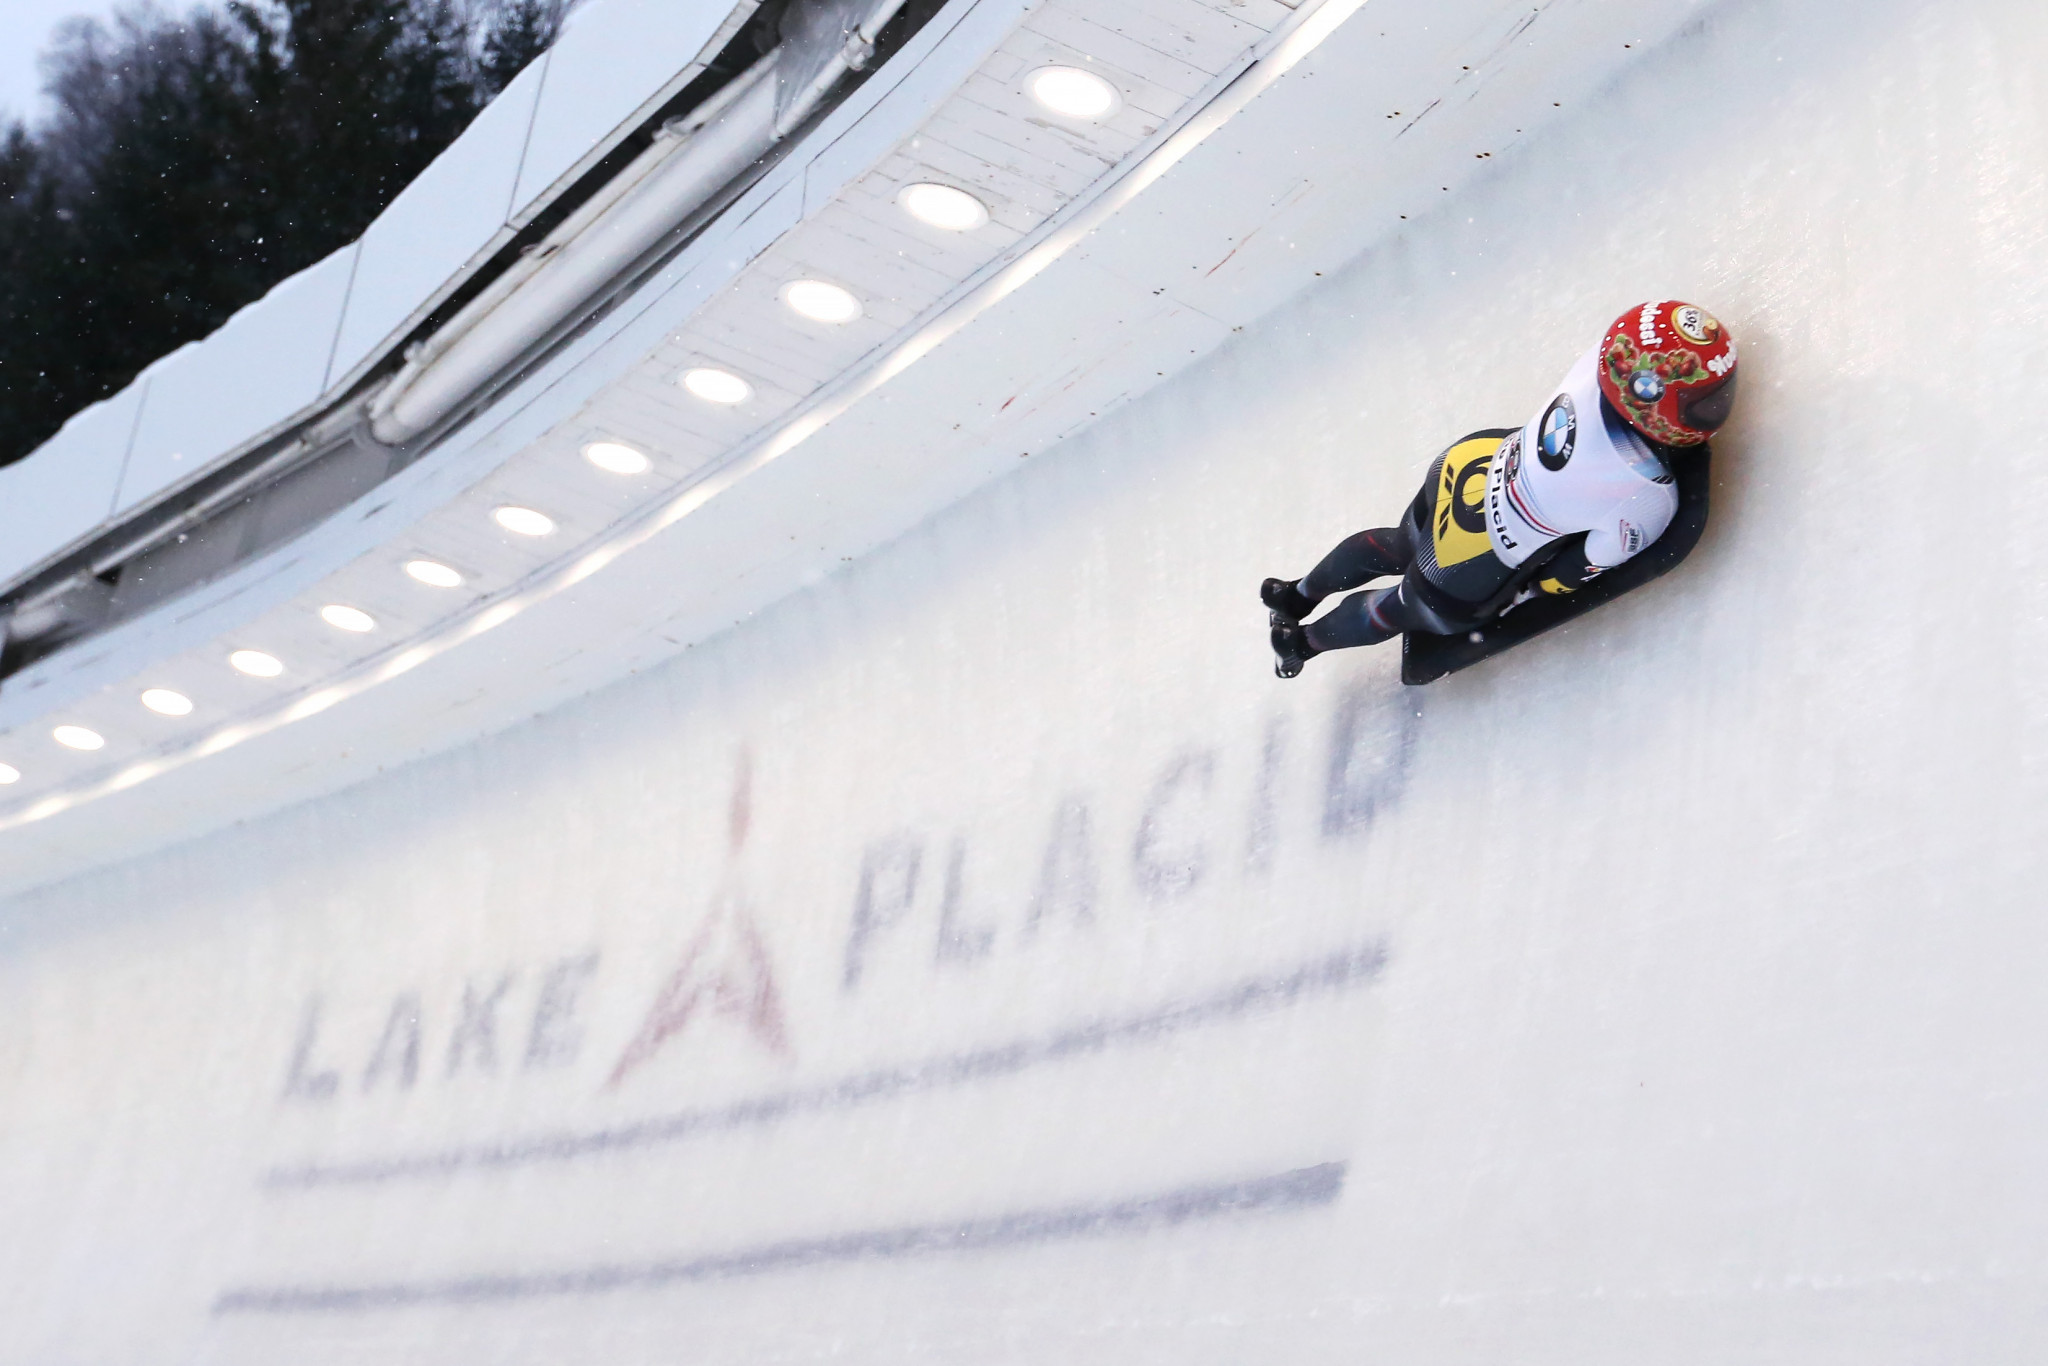 The IBSF had to move its 2021 World Championships from Lake Placid in the United States to Altenberg in Germany due to the COVID-19 pandemic ©Getty Images